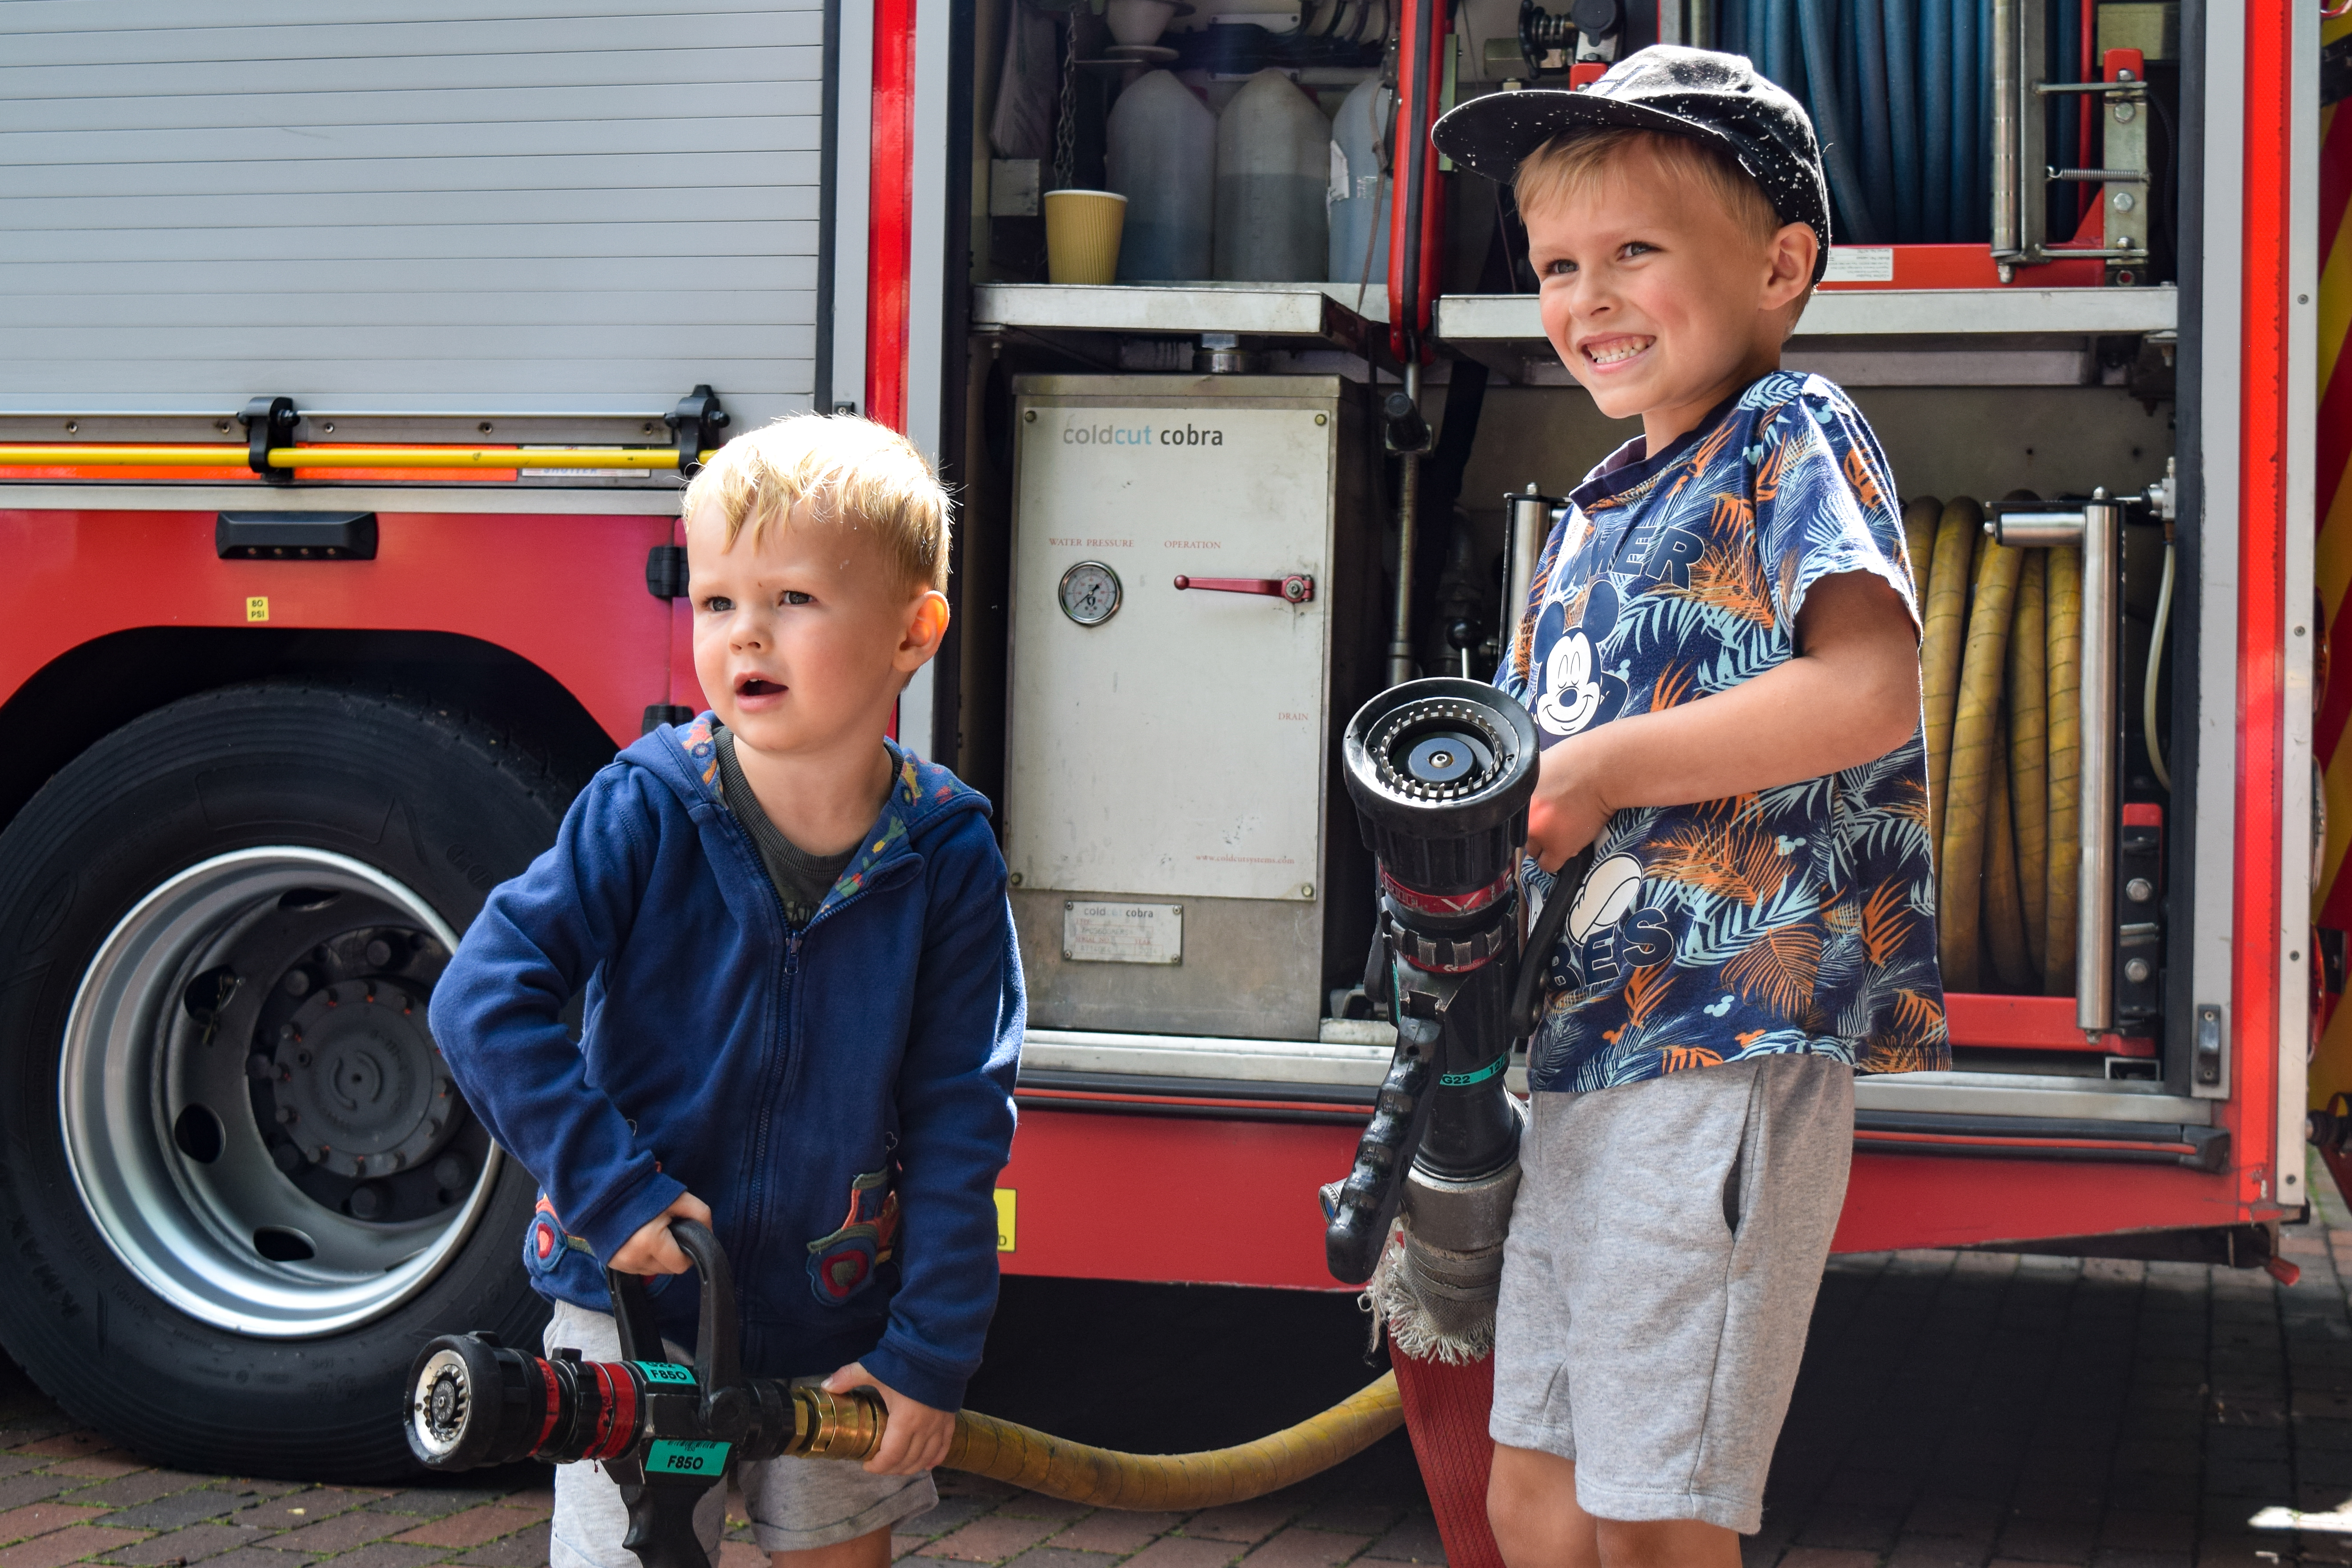 Two young boys smiling and exploring the fire engine.